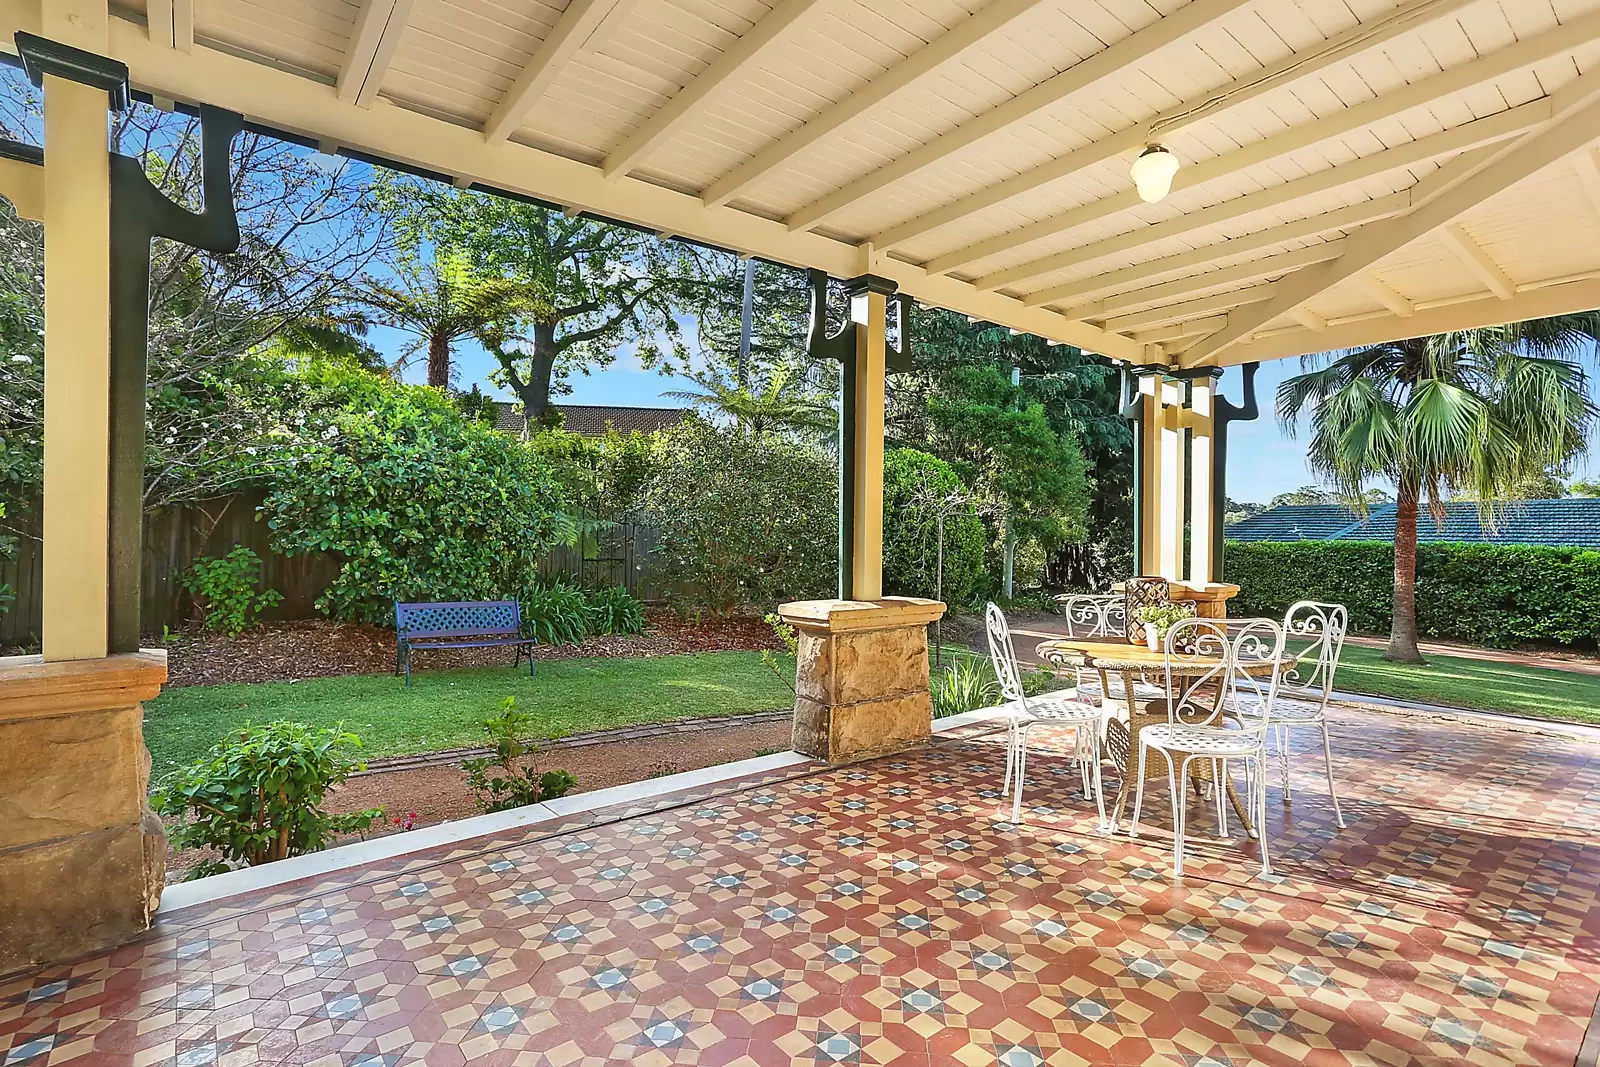 Photo #8: 32 Abuklea Road, Epping - Sold by Sydney Sotheby's International Realty